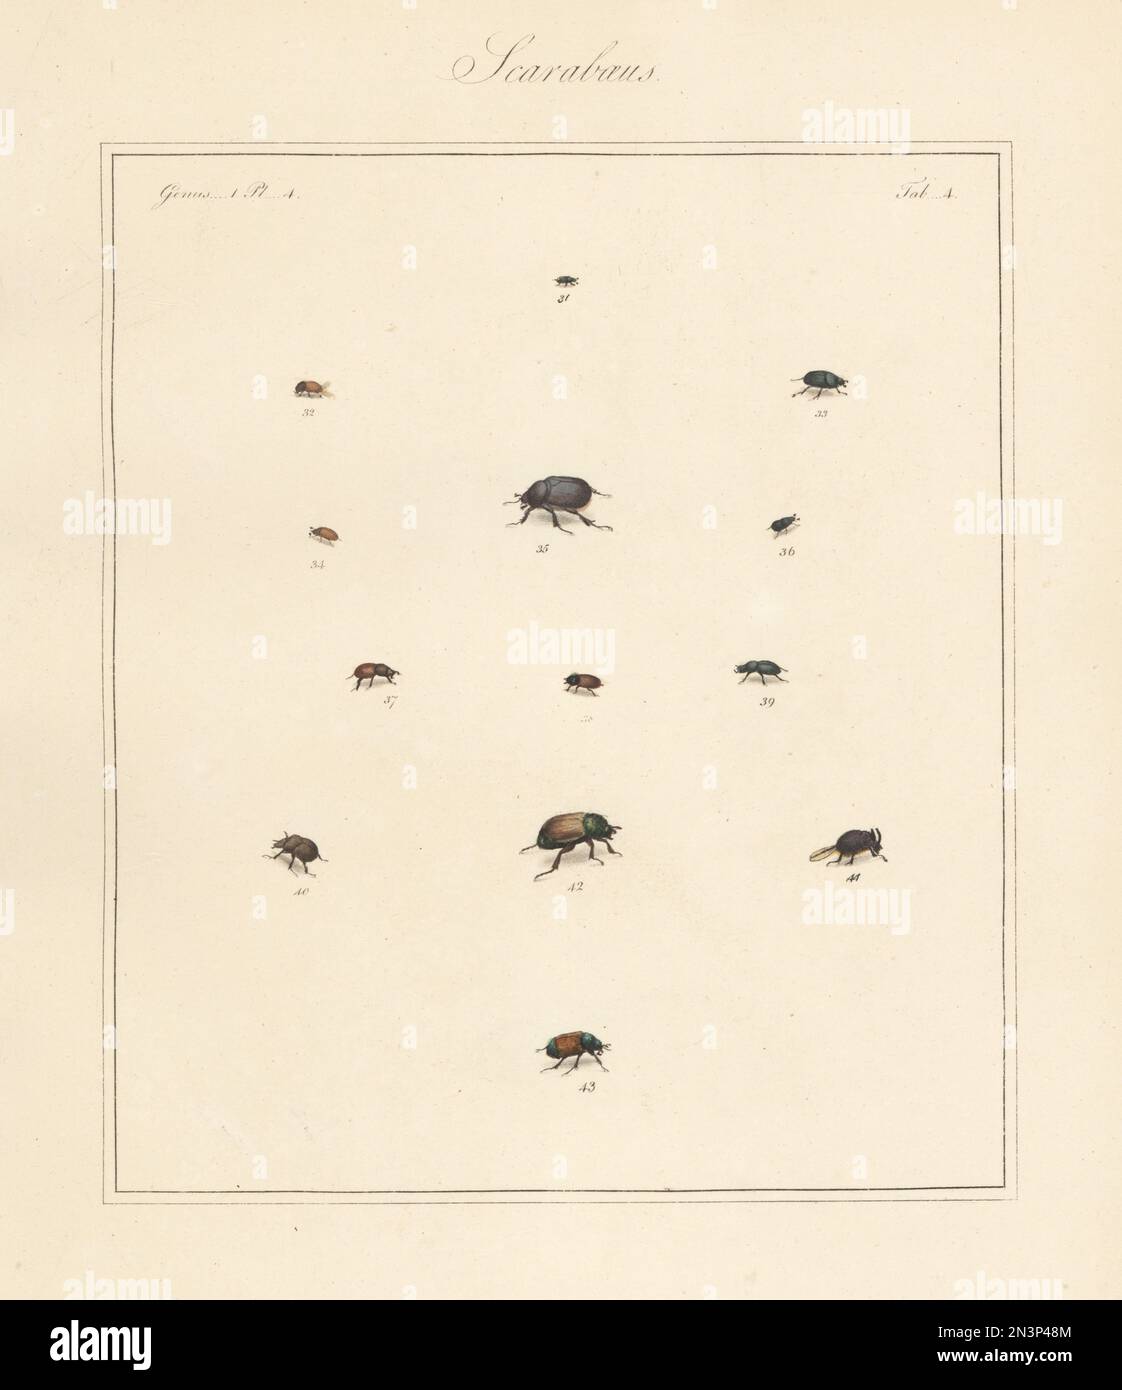 Species of scarab beetles. Bloody small dung beetle, Otophorus haemorrhoidalis 31, subterranean small dung beetle, Eupleurus subterraneus 33, Esymus merdarius 34, N.S. 35, 38, Onthophagus ovatus 36, erratic small dung beetle, Colobopterus erraticus 37, Diplognatha gagates 39, Odonteus armiger 40,41, Anomala dubia subsp. dubia 42, and garden chafer, Phyllopertha horticola 43. Handcoloured copperplate engraving from Thomas Martyn’s The English Entomologist, Exhibiting all the Coleopterous Insects found in England, Academy for Illustrating and Painting Natural History, London, 1792. Stock Photo